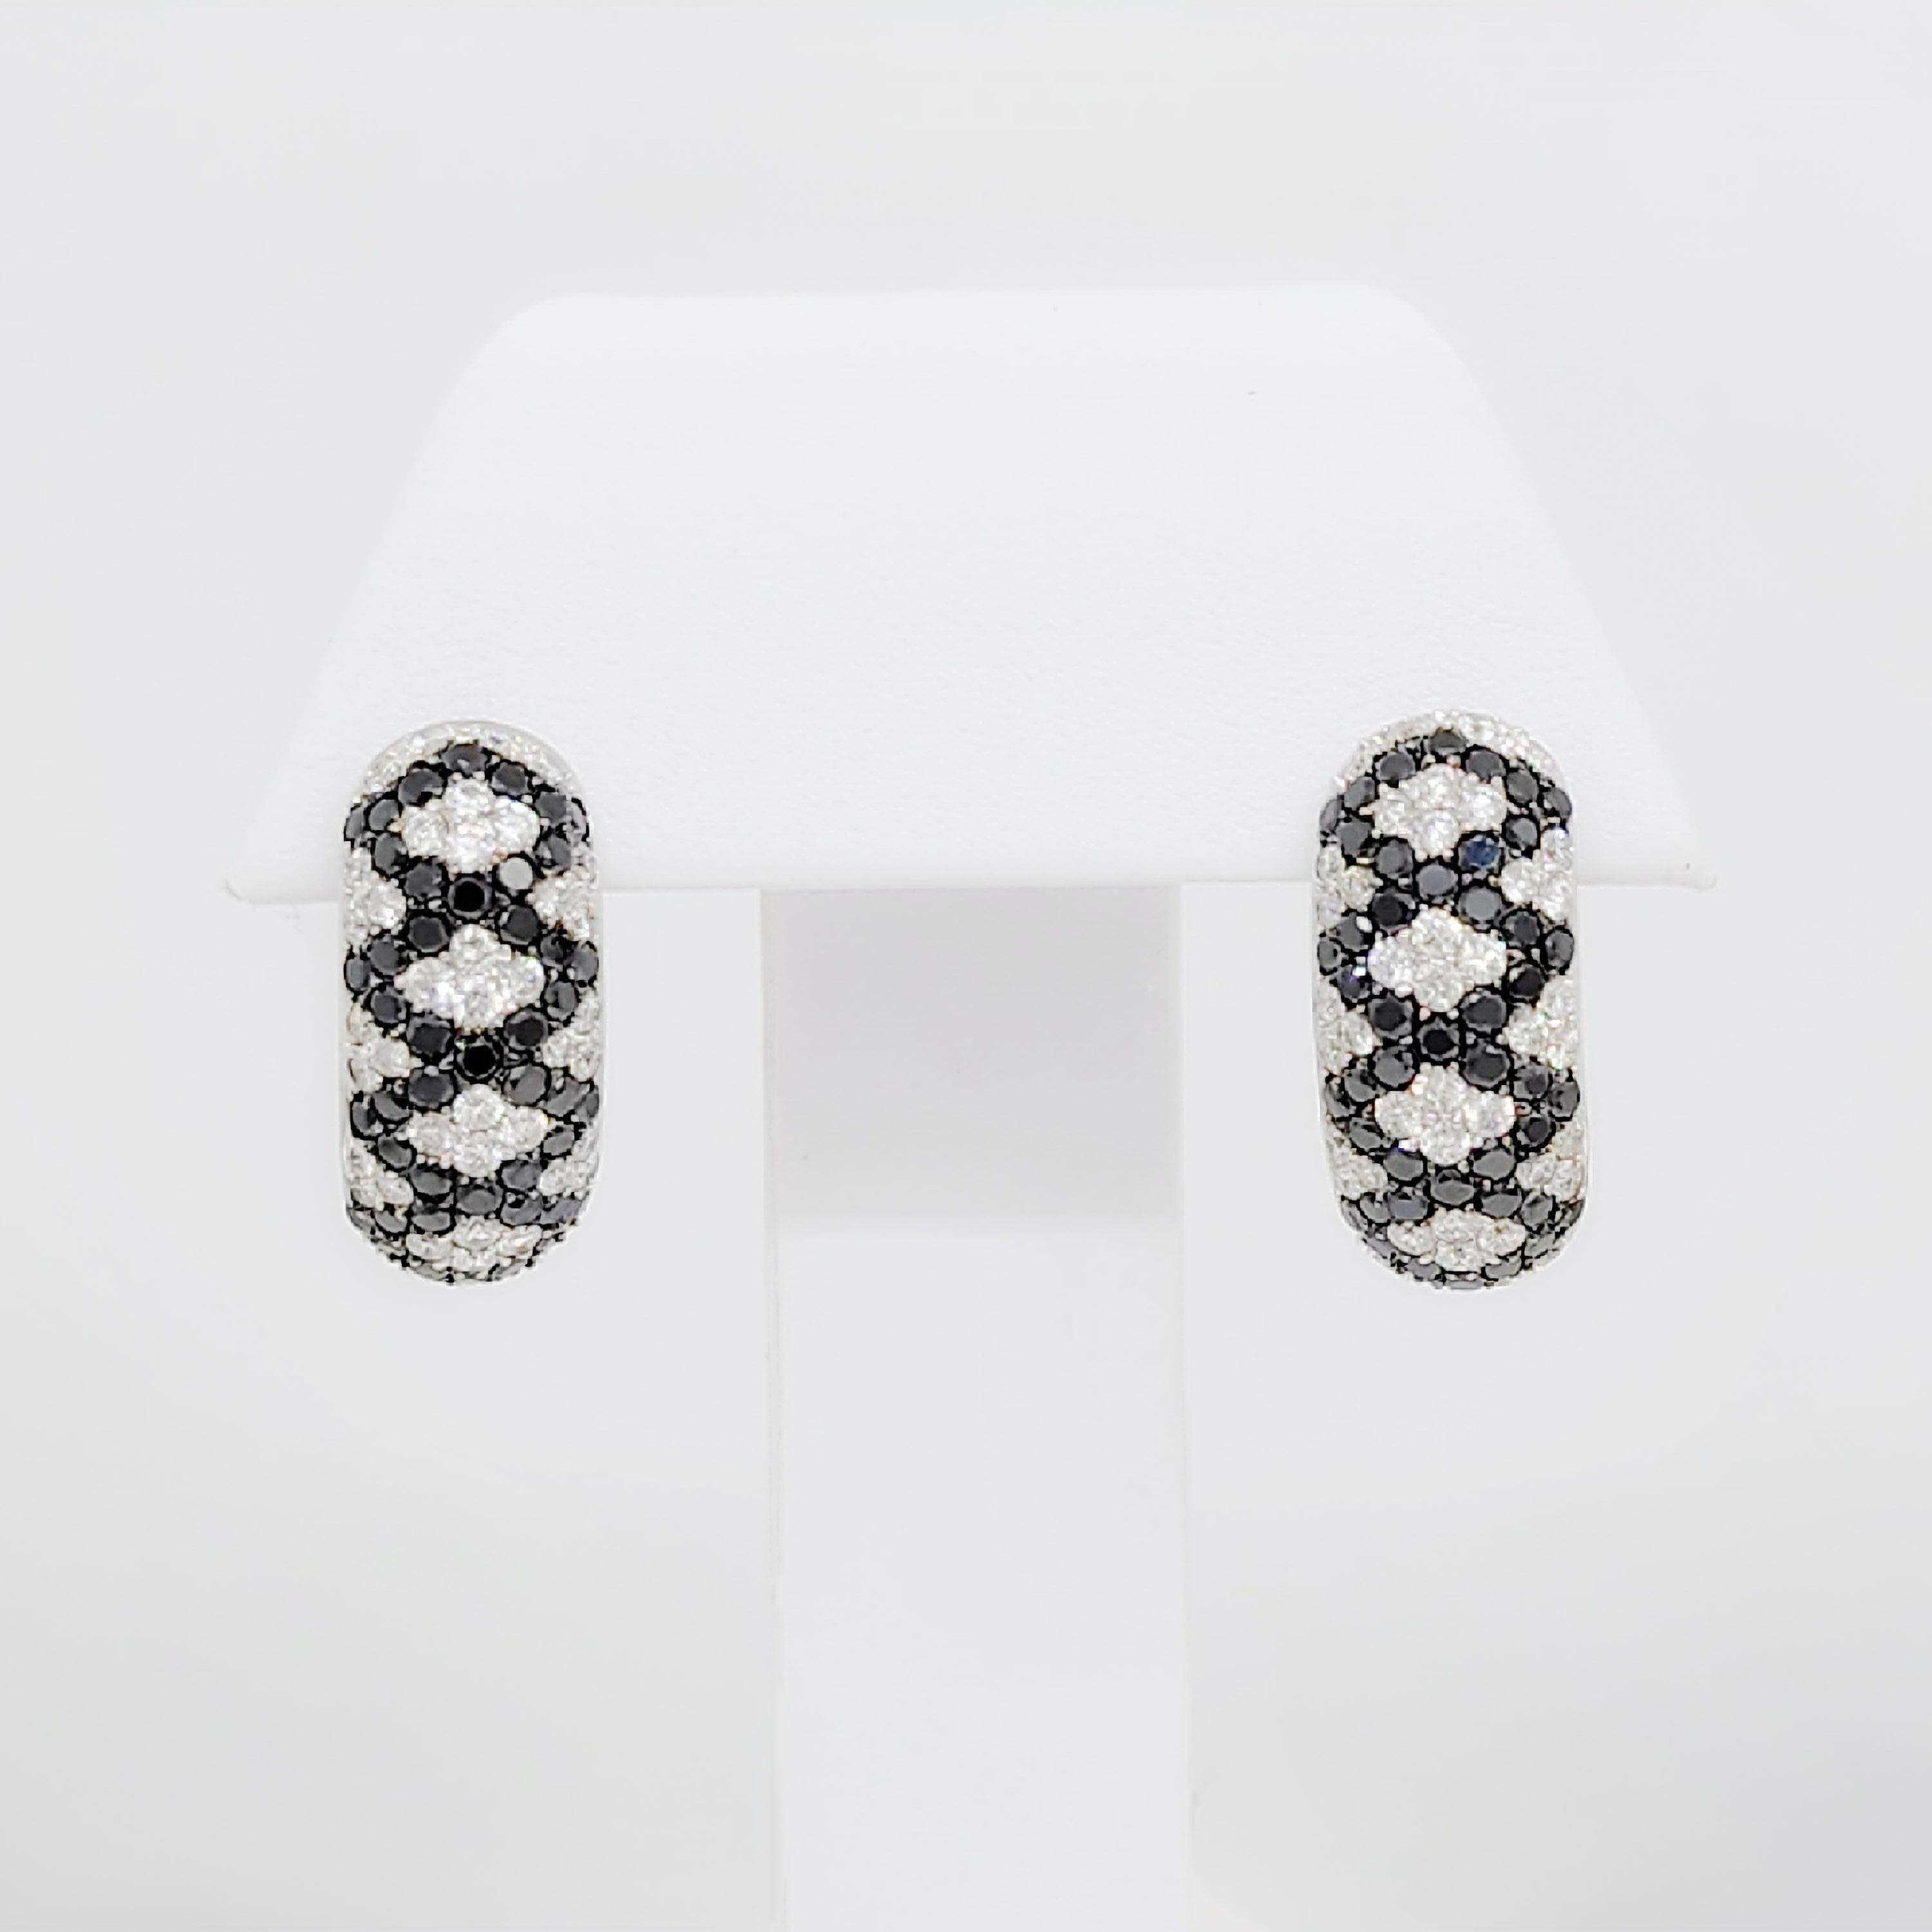 Beautiful 1.10 ct. white diamond rounds with 1.30 ct. black diamond rounds in this fun design.  Handmade in 14k white gold.  These earrings are a great addition to any jewelry collection.